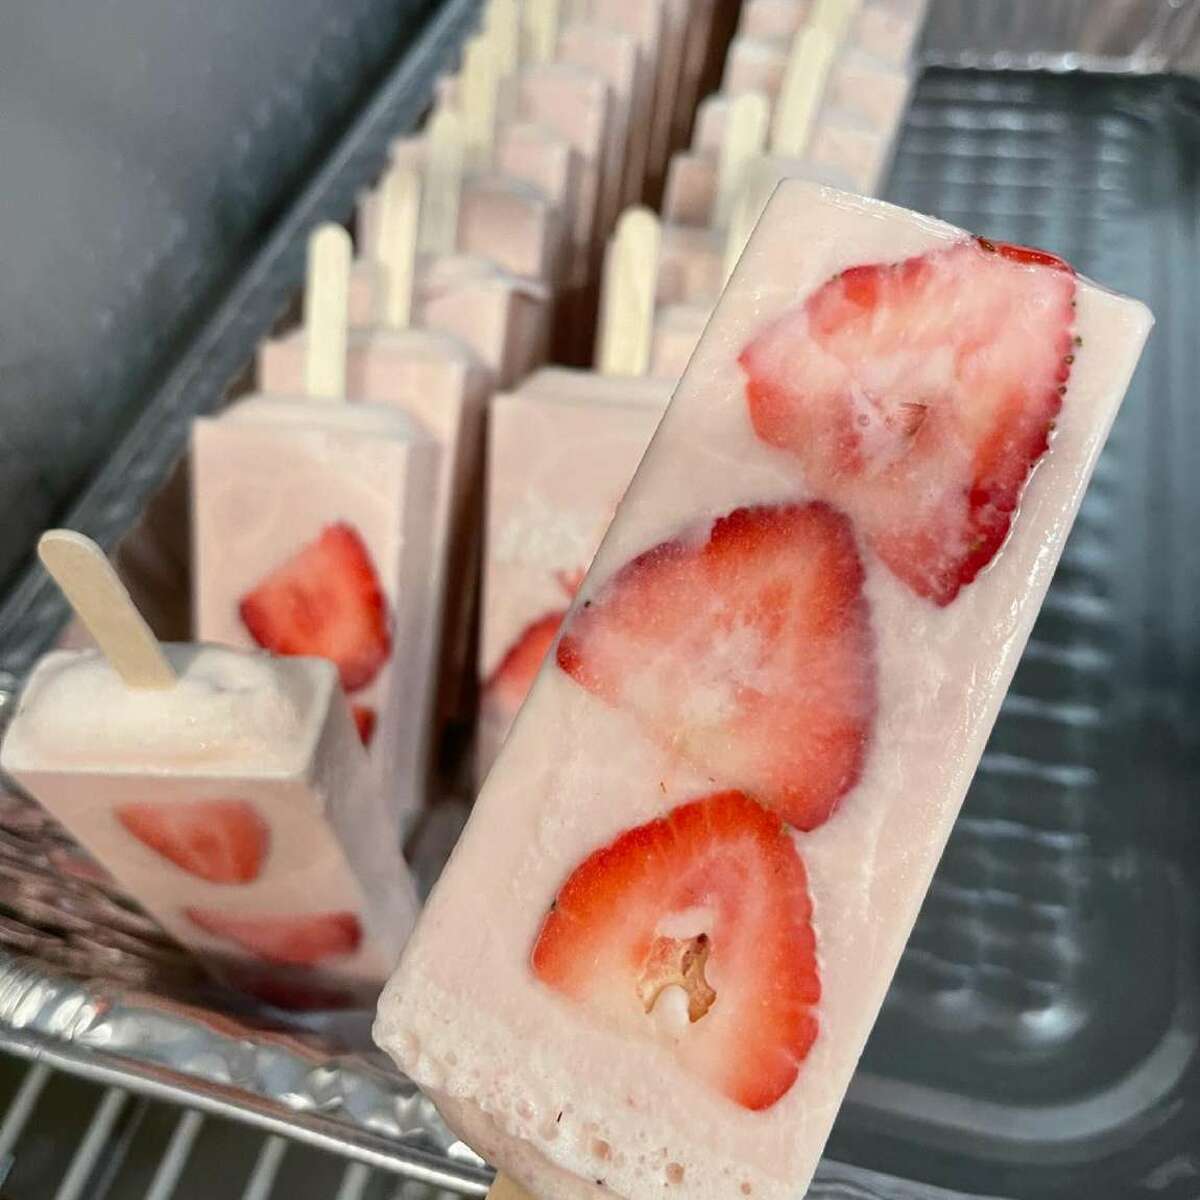 Dave's Gourmet Paletas, FairfieldRemember the simple childhood pleasure of biting into a frosty Popsicle after a day in the summer sun? Dave Rock is aiming to recapture that feeling with Dave's Gourmet Paletas, with 20 flavors of Mexican-style ice pops. The hand-crafted, preservative-free flavors range from classics like strawberry, chocolate and coconut to more exotic choices like mango chamoy, matcha, banana Nutella and passion fruit. Paletas can also be topped with chocolate and extra garnishes, like candies, pretzels, sprinkles or dessert sauces.1492 Post Road, 203-292-3757, facebook.com/davesgourmetpaletas.